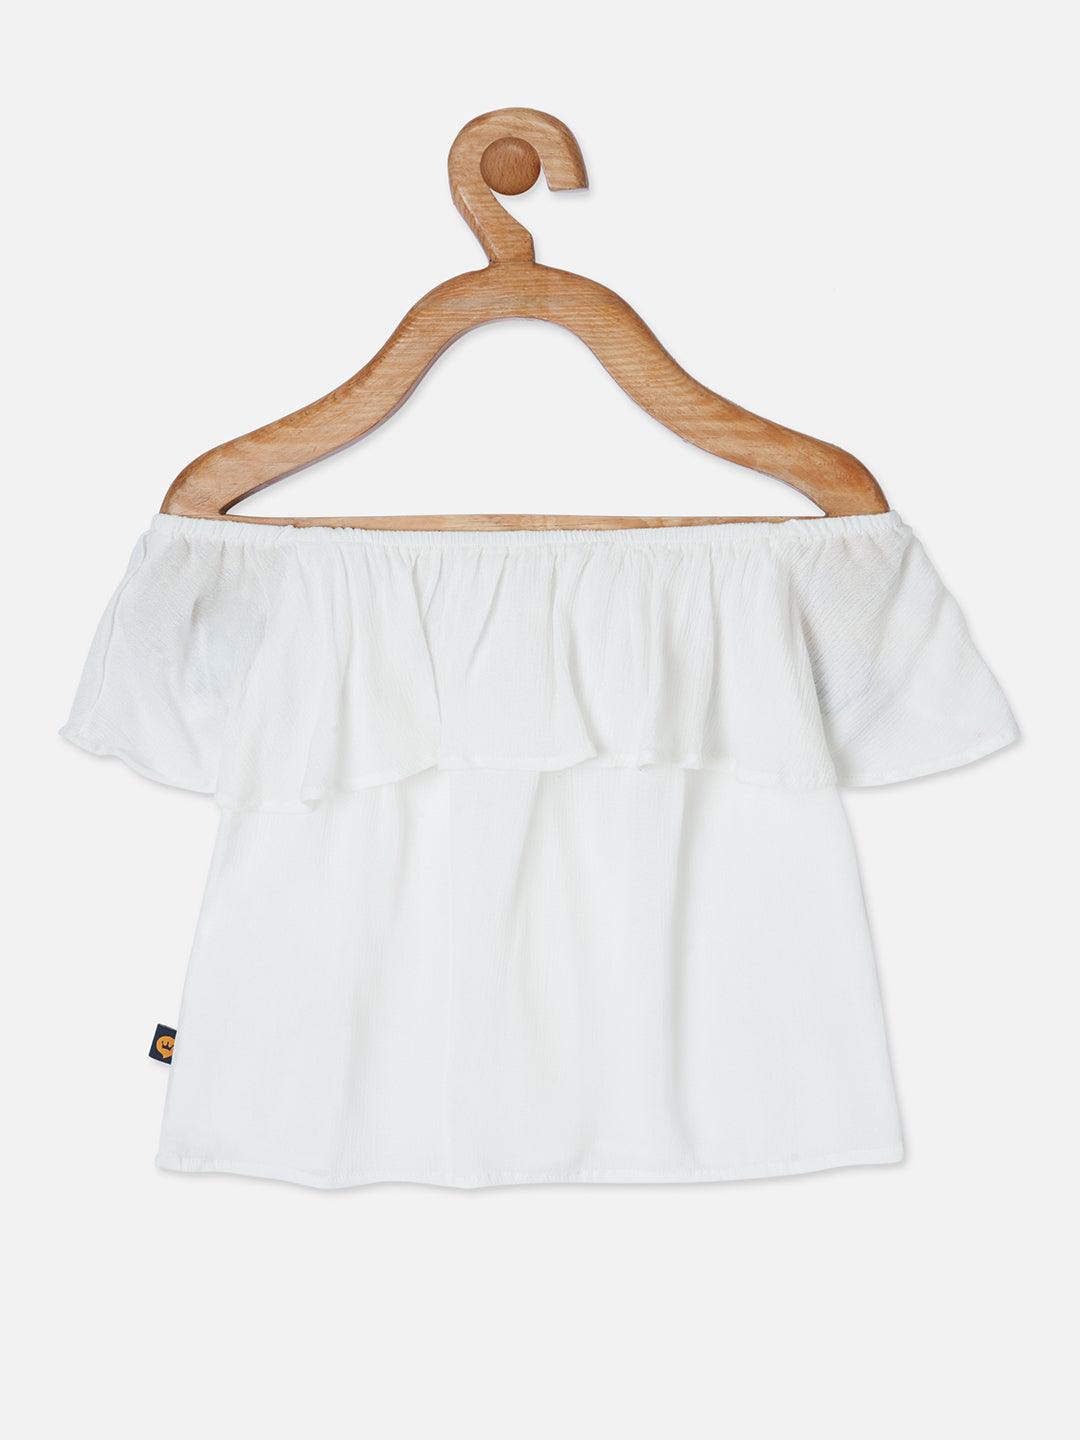 Girls cotton White embroidered off shoulder top - Lagorii Kids